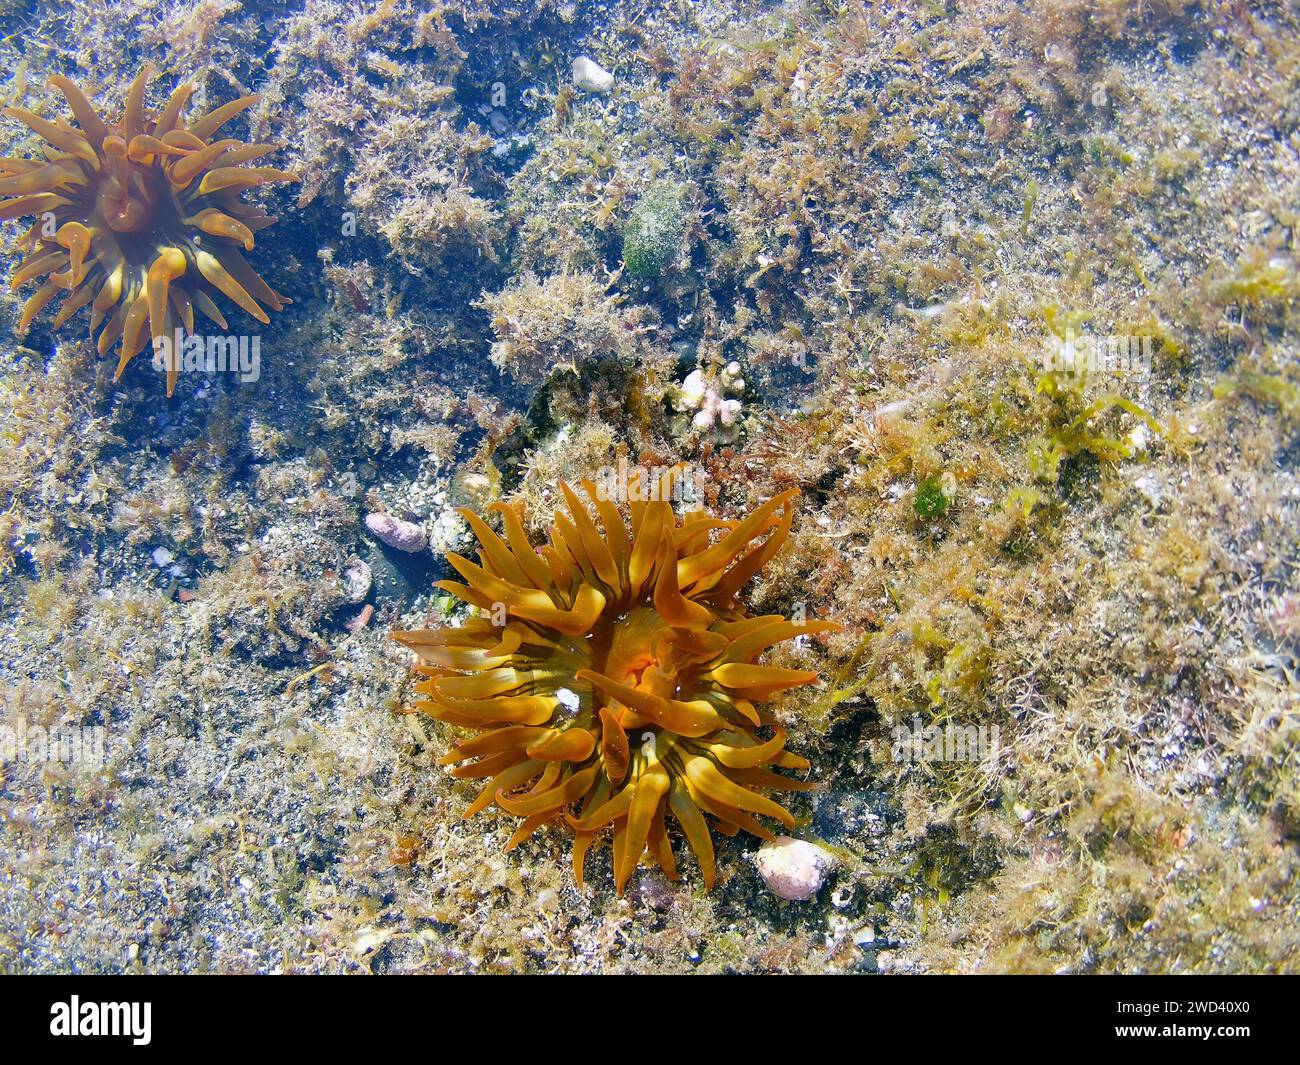 Sea anemones, coral and other organisms growing in a rockpool on the volcanic rocks off the coast of the Fuerteventura, Canary Islands, Spain. Stock Photo